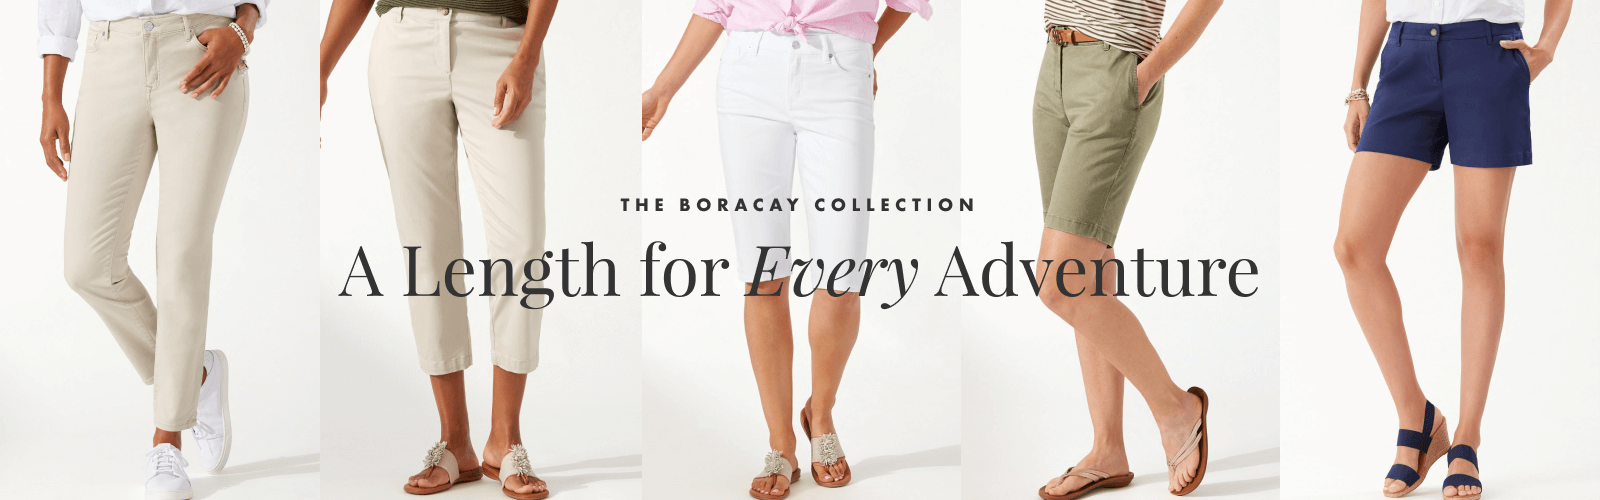 The Boracay Collection: A Length for Every Adventure